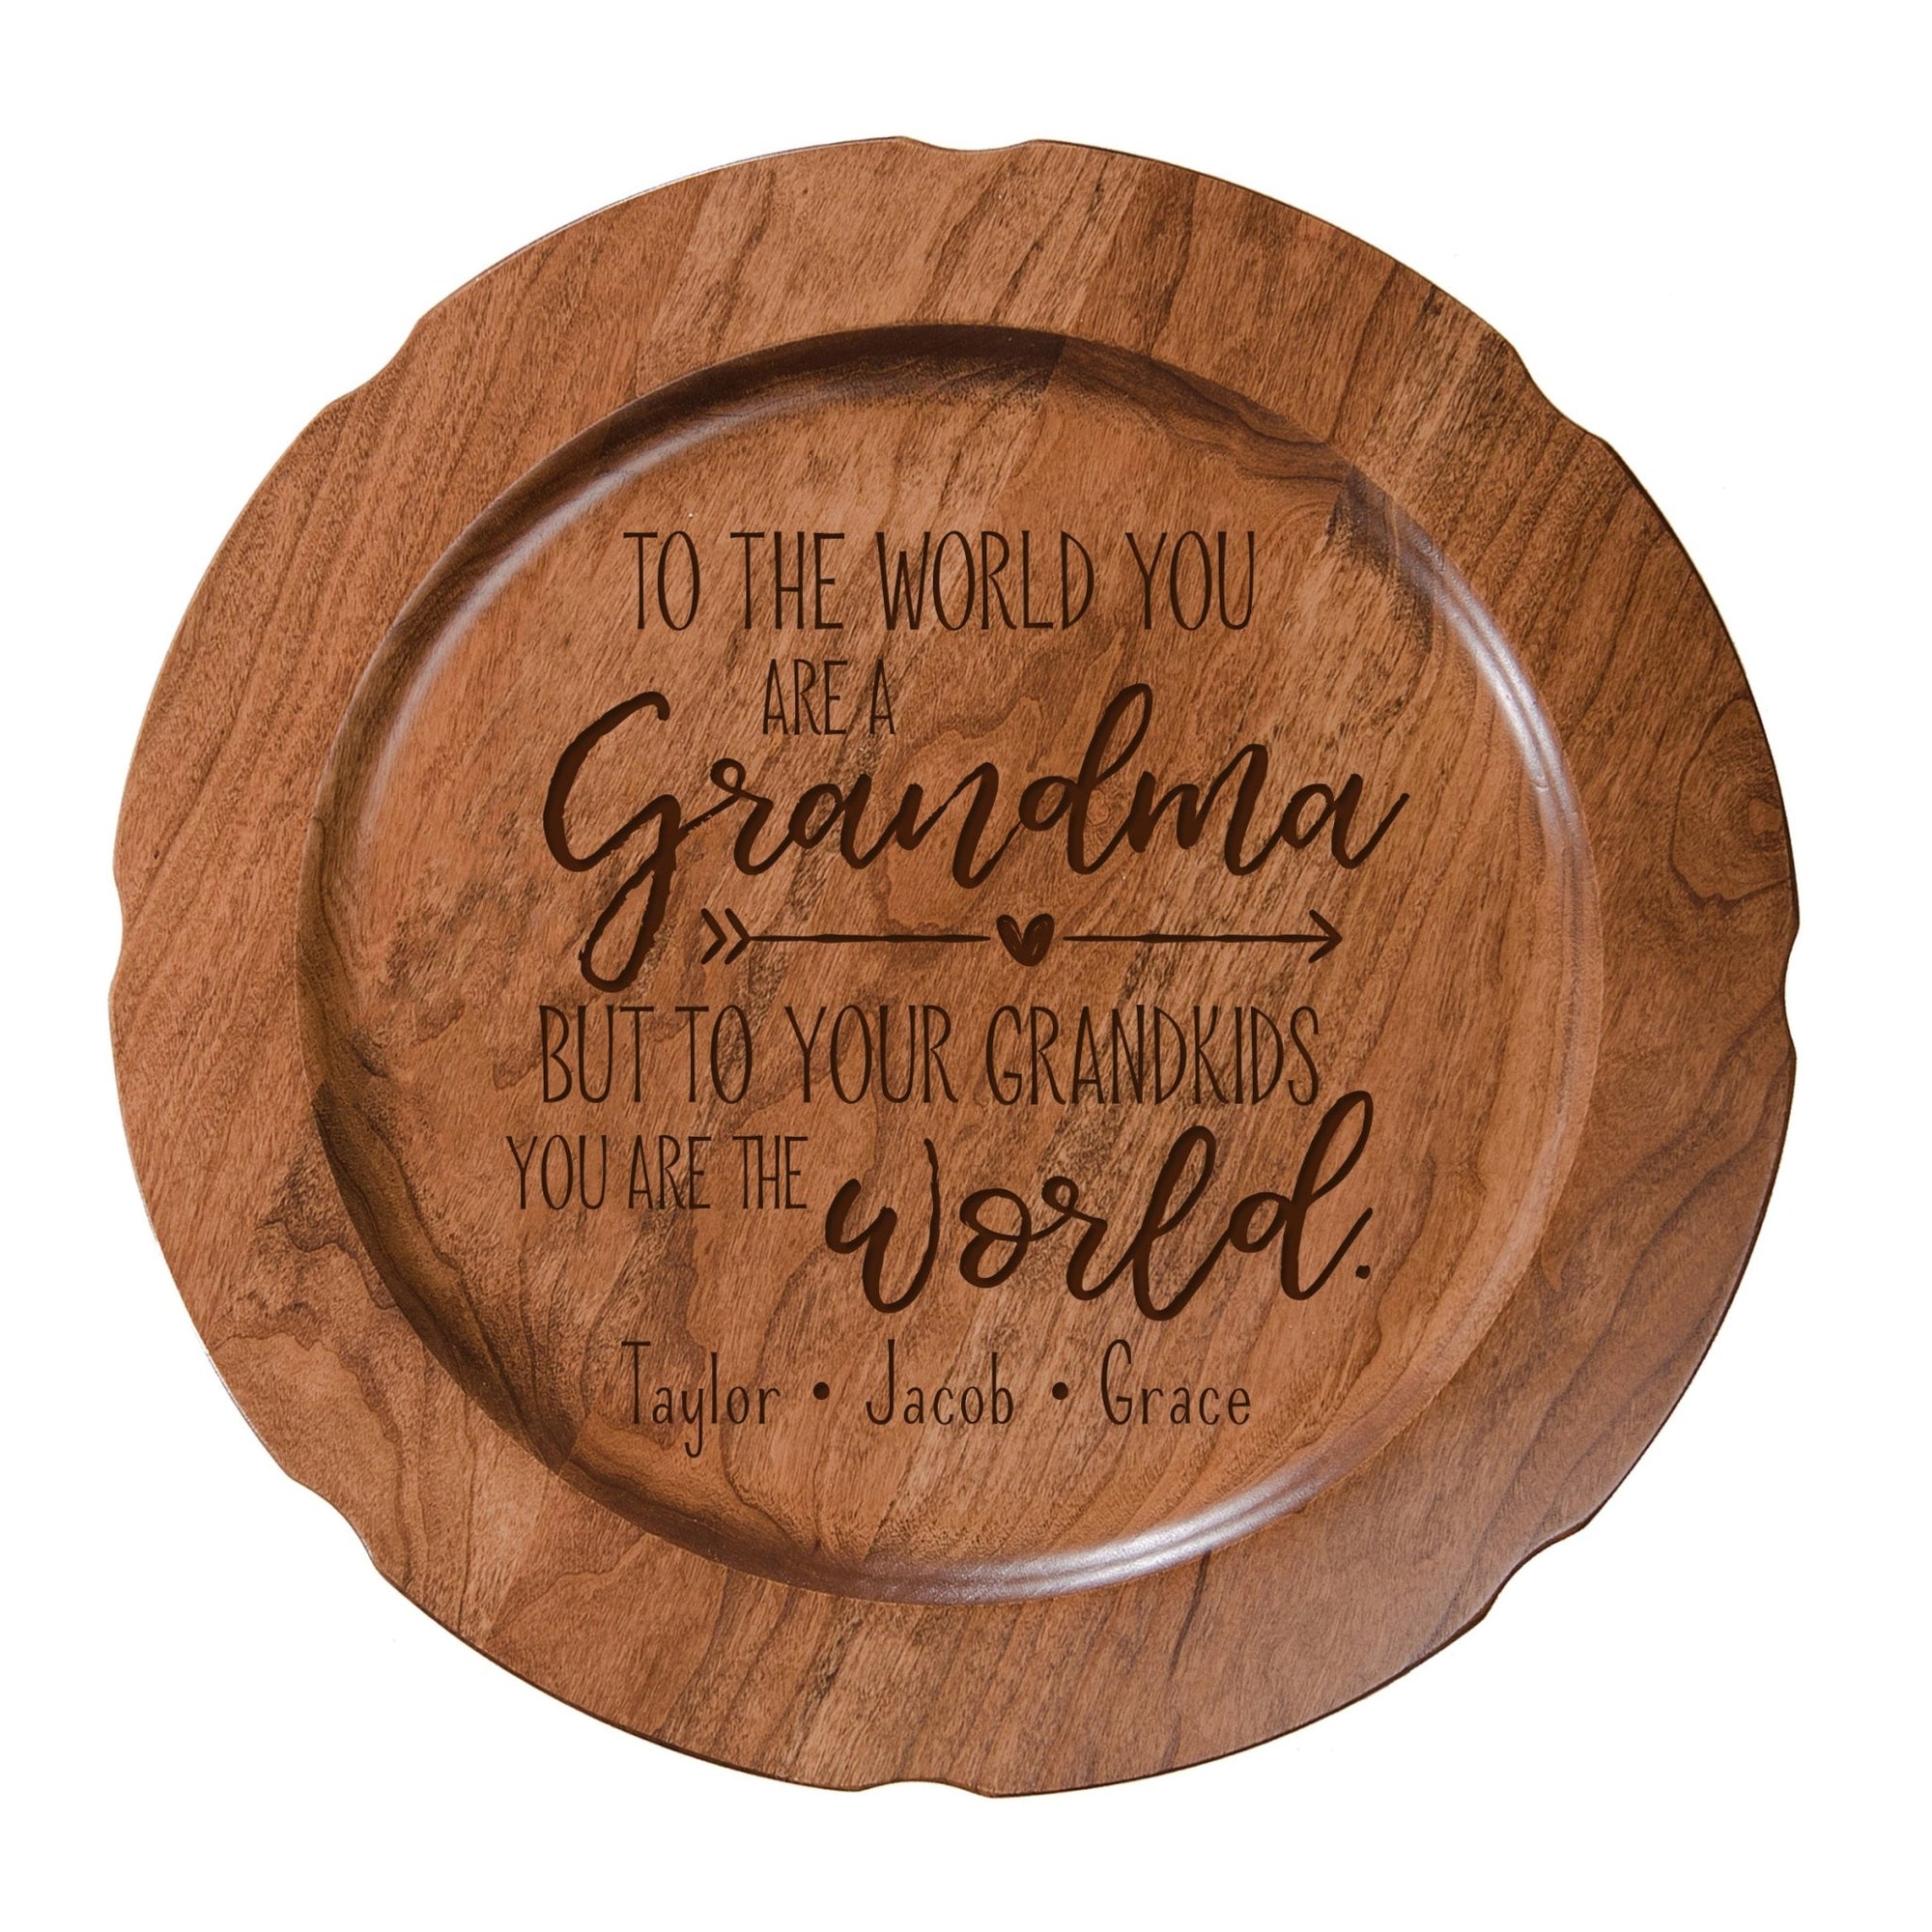 Personalized Mother's Day Cherry Wooden Plates - To The World - LifeSong Milestones